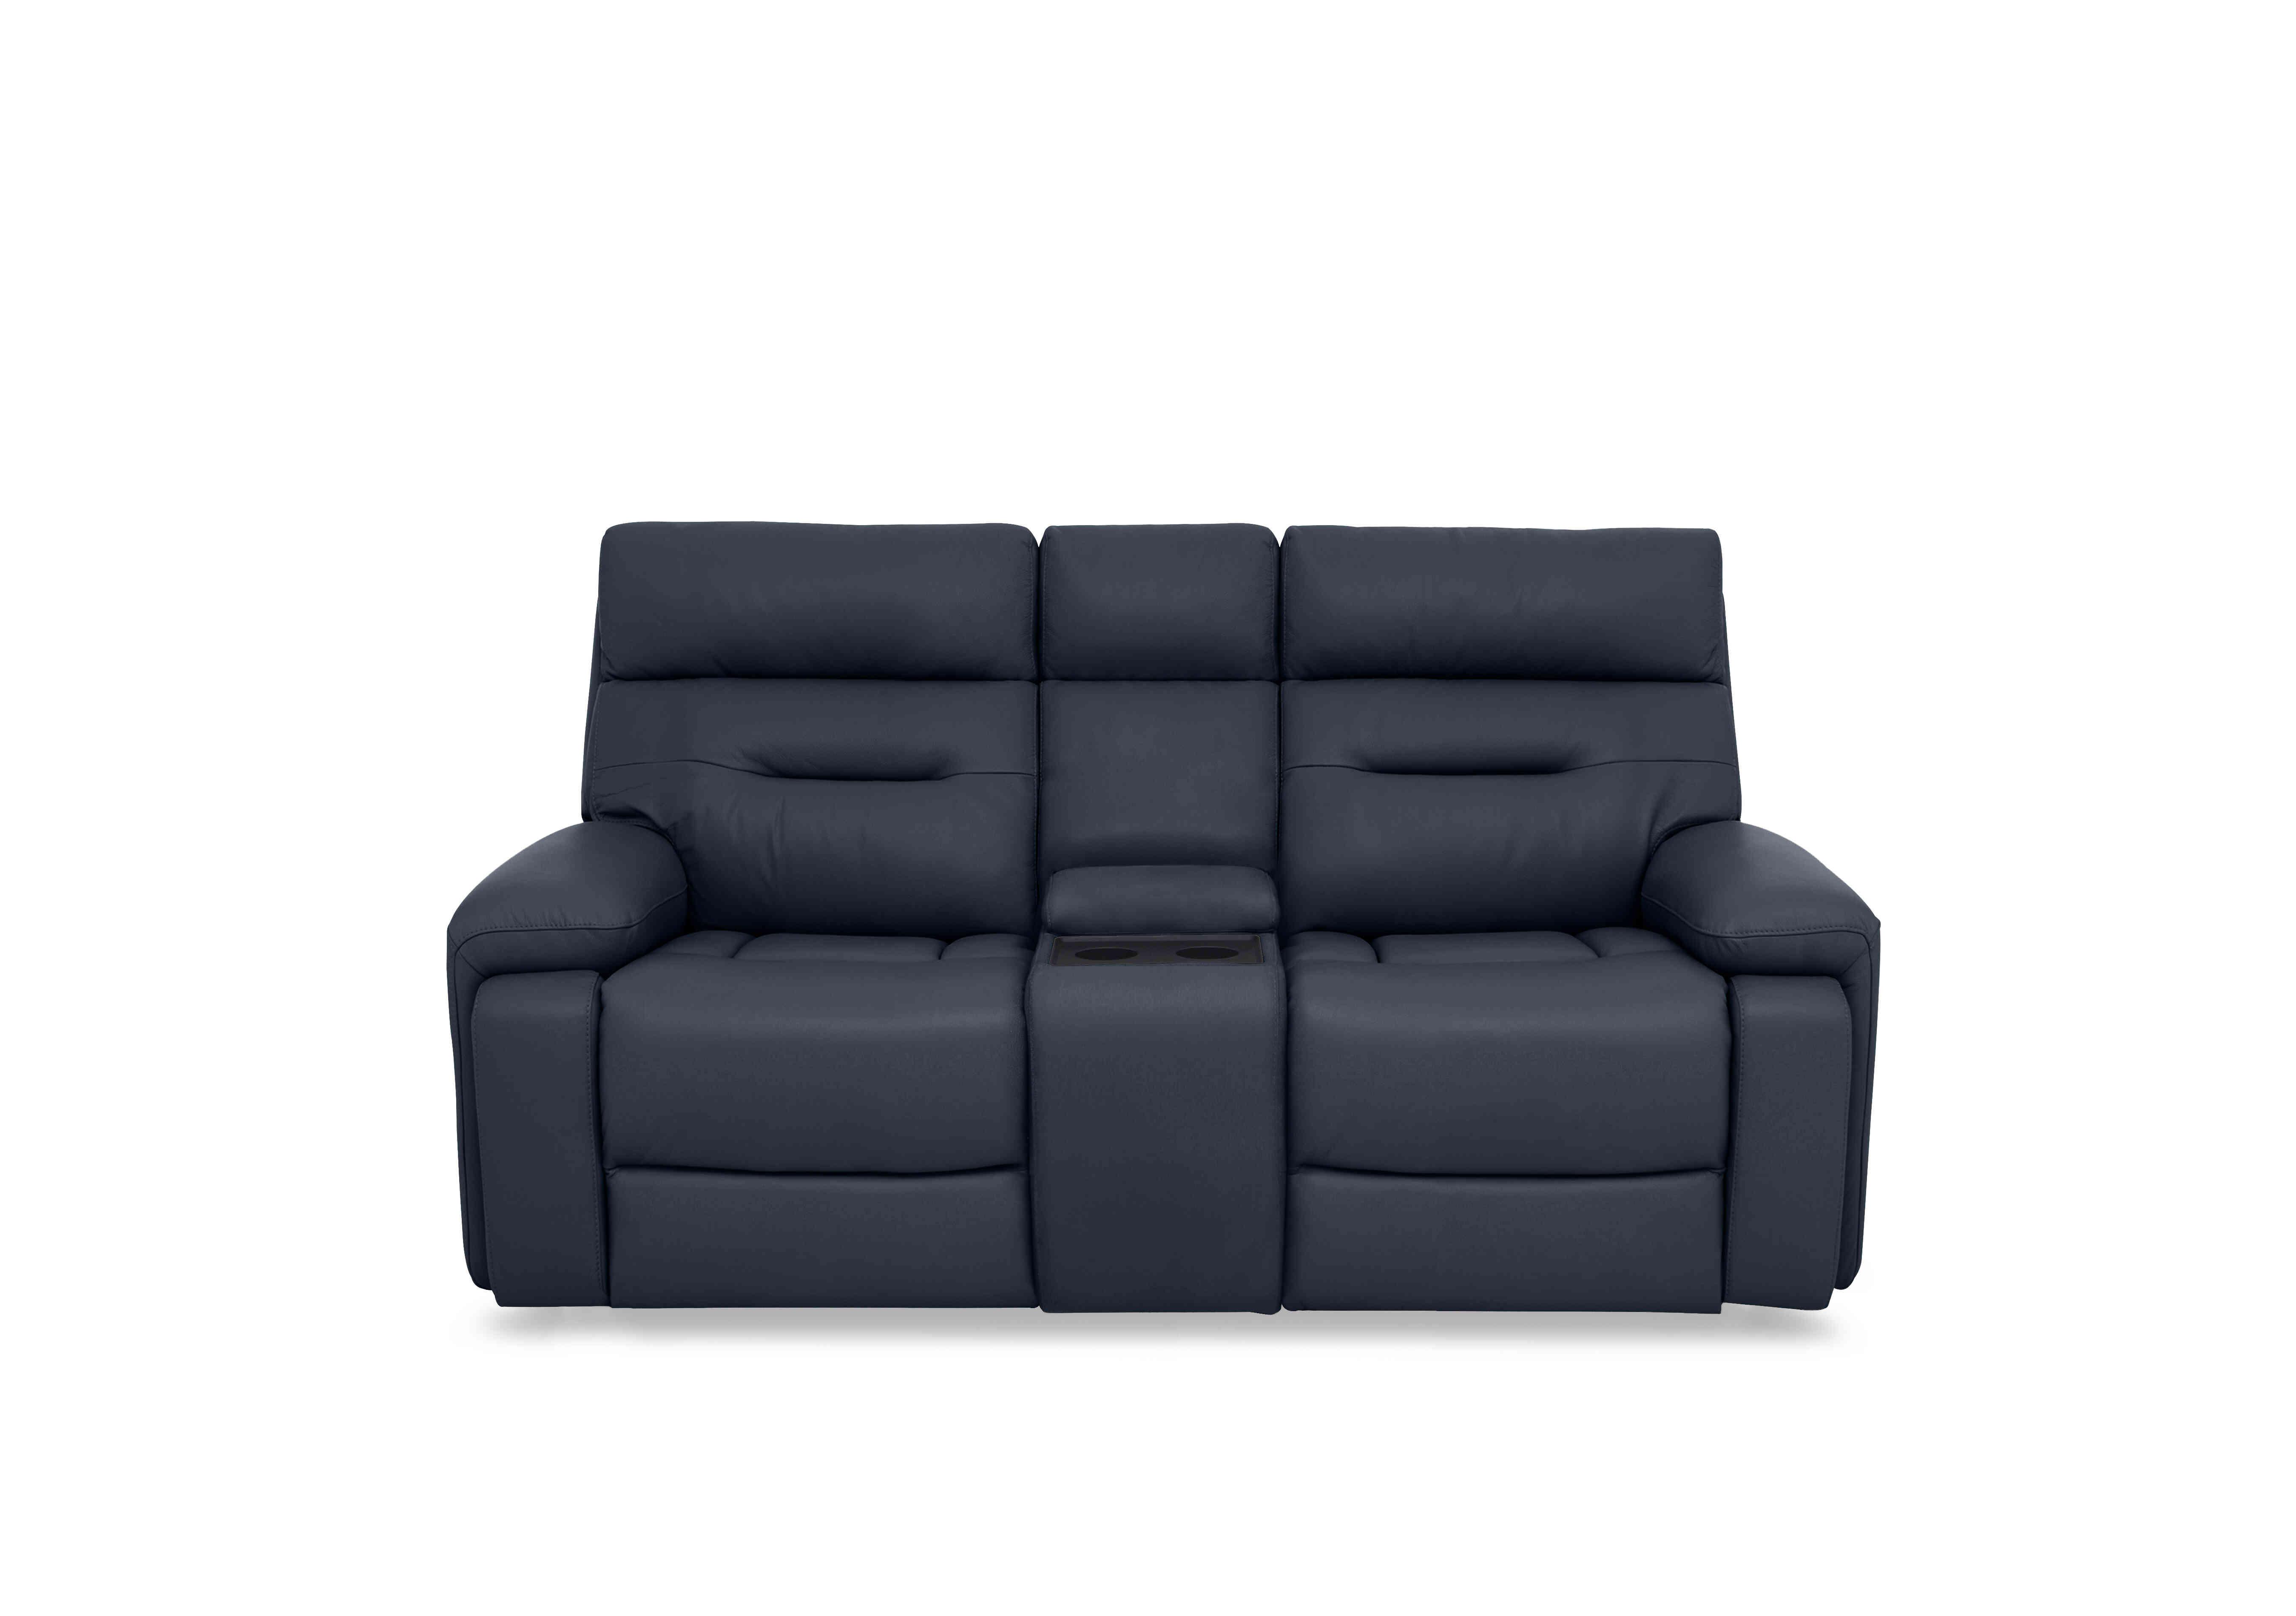 Cinemax Media 2 Seater Leather Power Recliner Sofa with Power Headrests in La-4828 Natural Milled Navy on Furniture Village